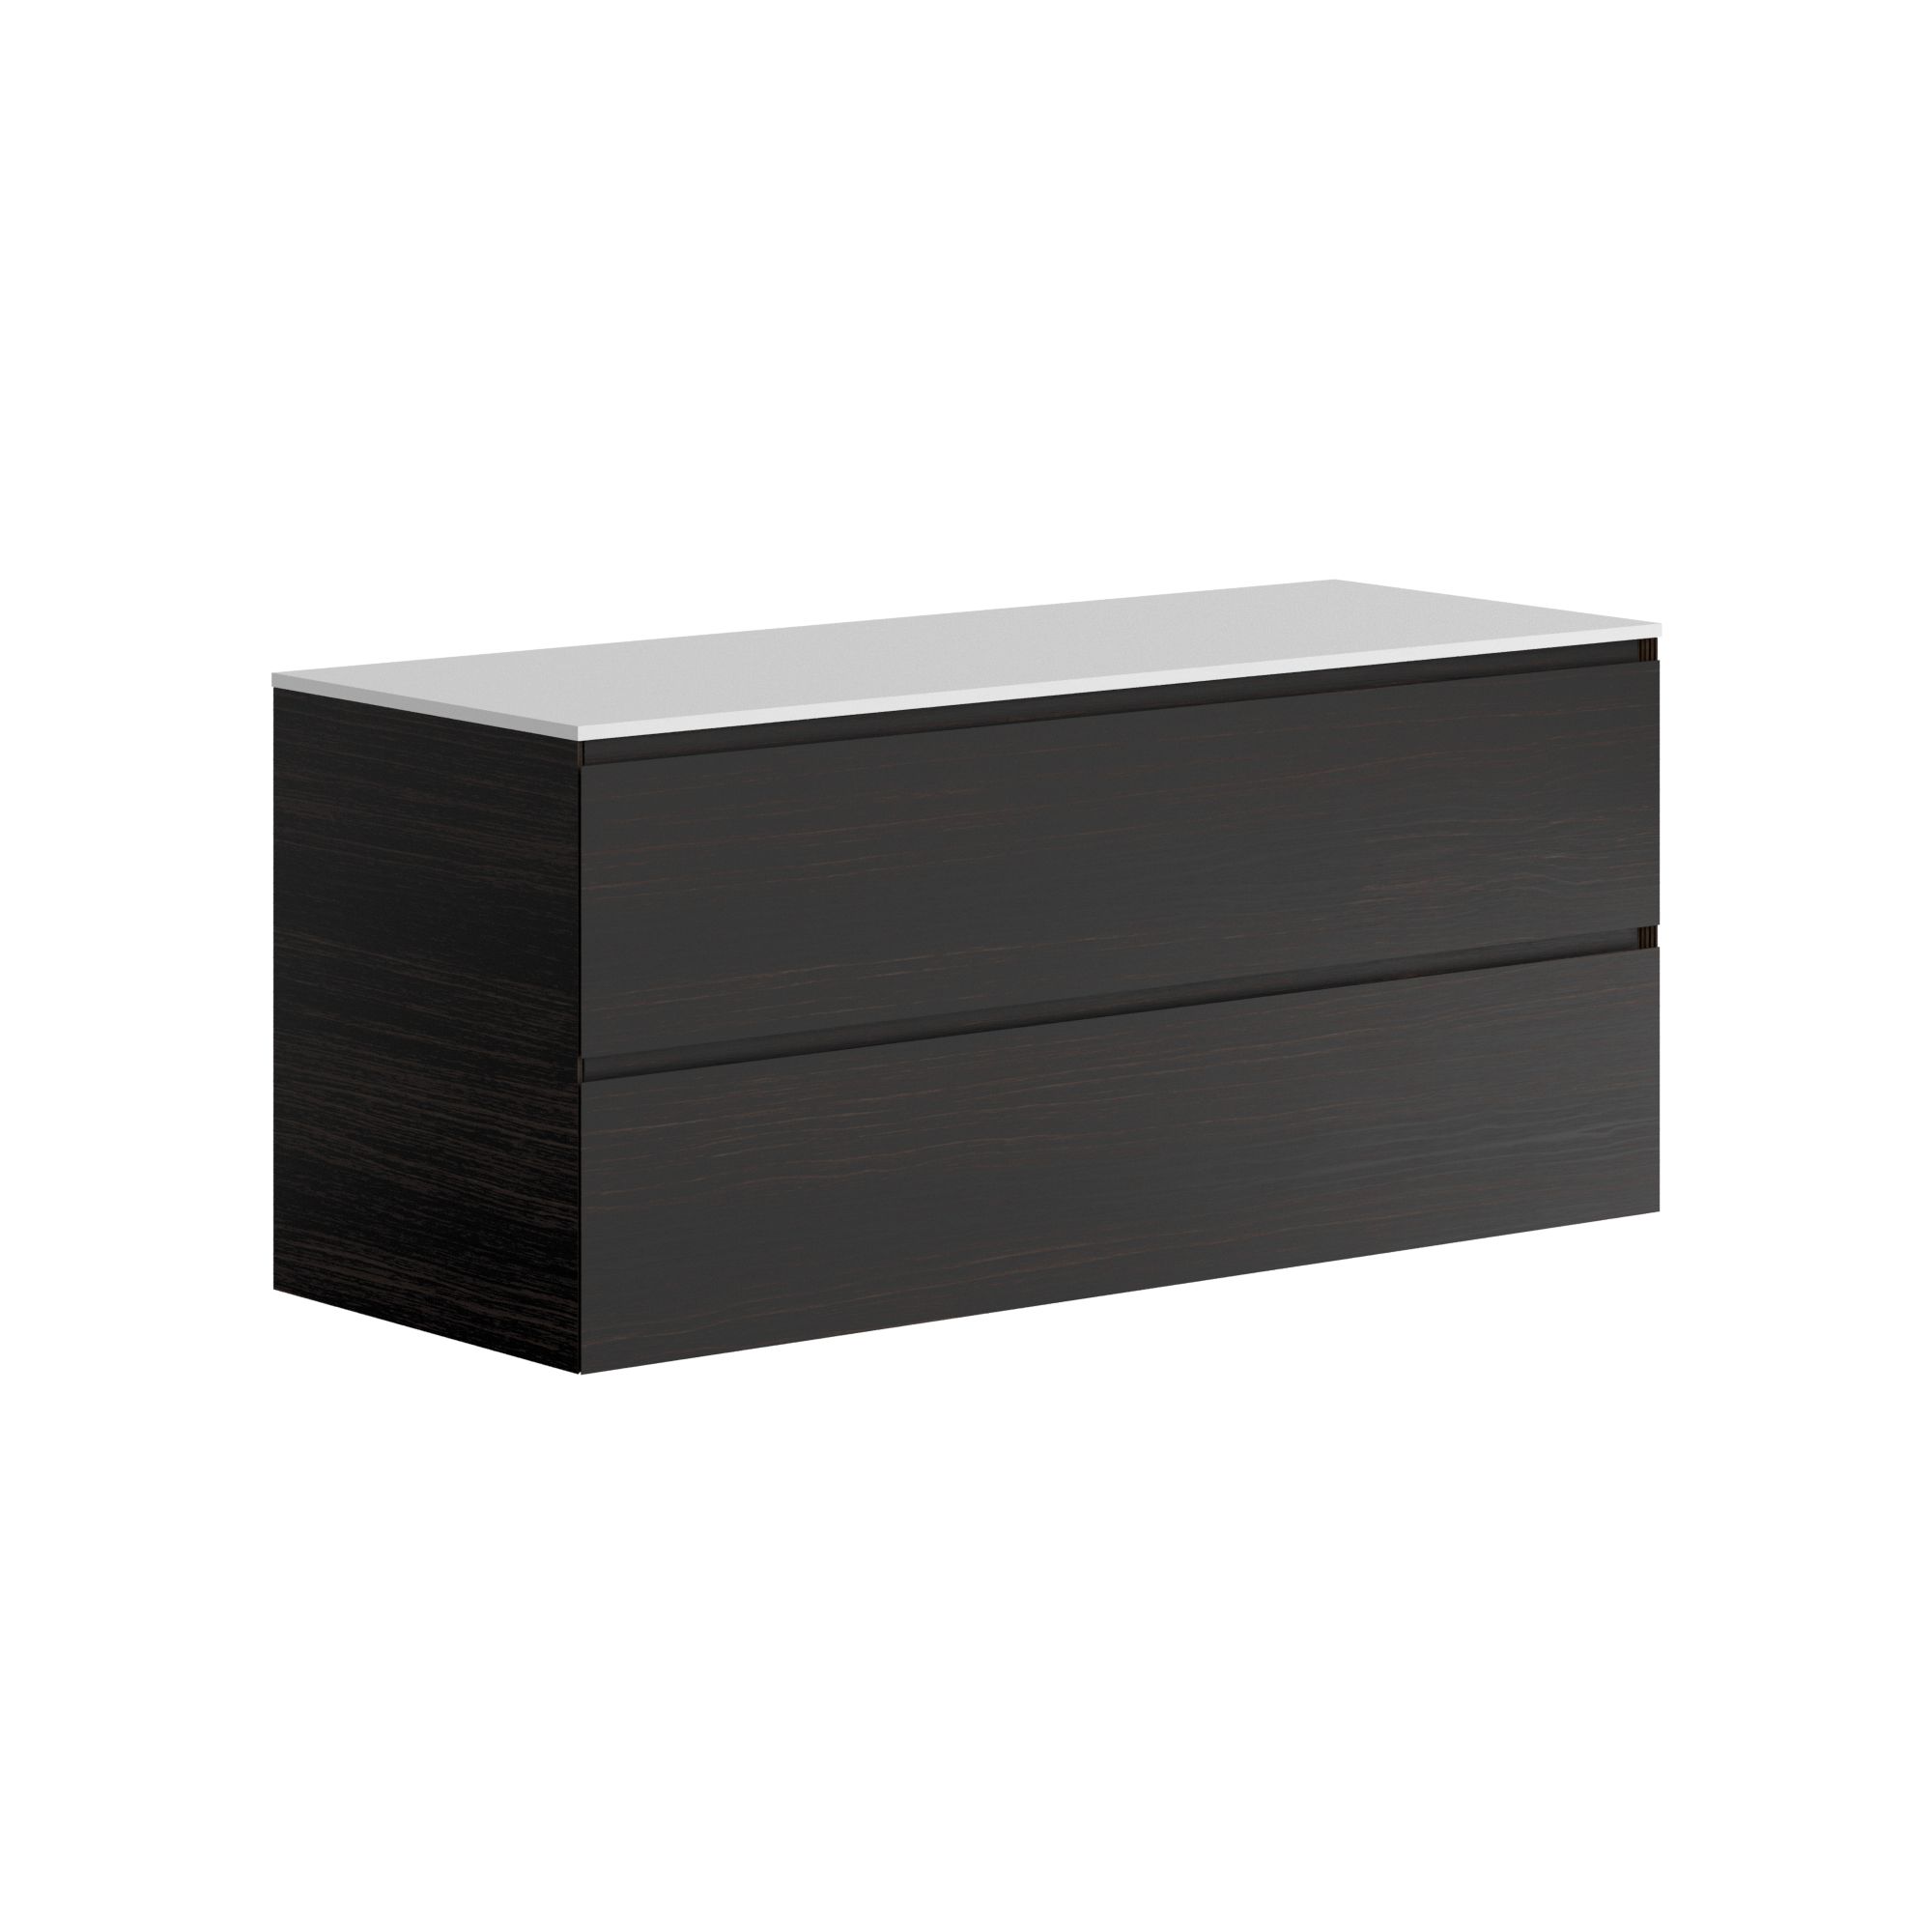 The Ellery Auxiliary Pull Open Unit 1200x520mm with Solid Surface Countertop